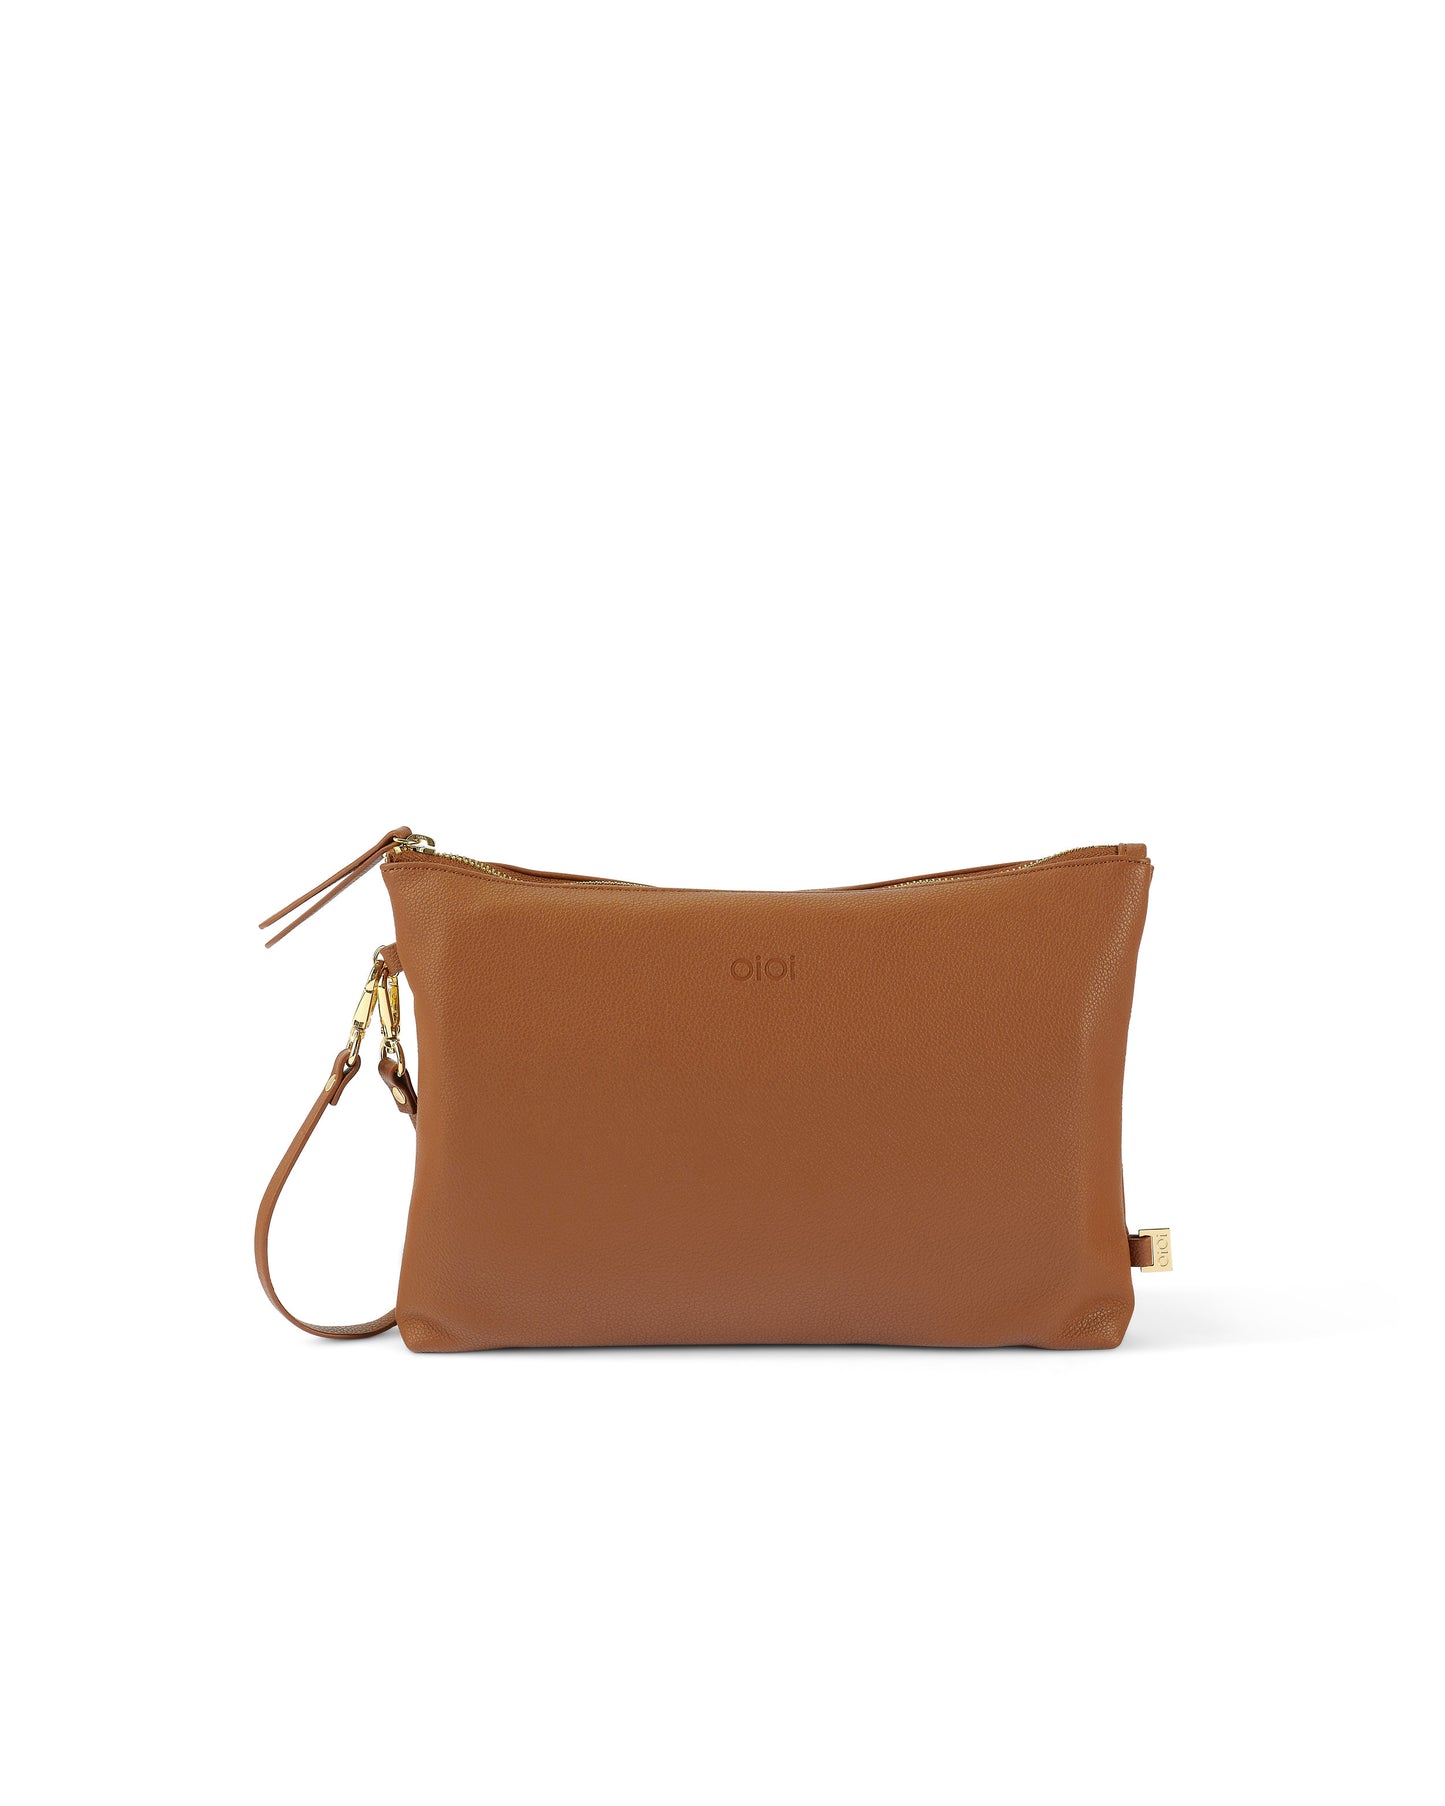 OiOi Nappy Changing Pouch Chestnut Brown Vegan Leather